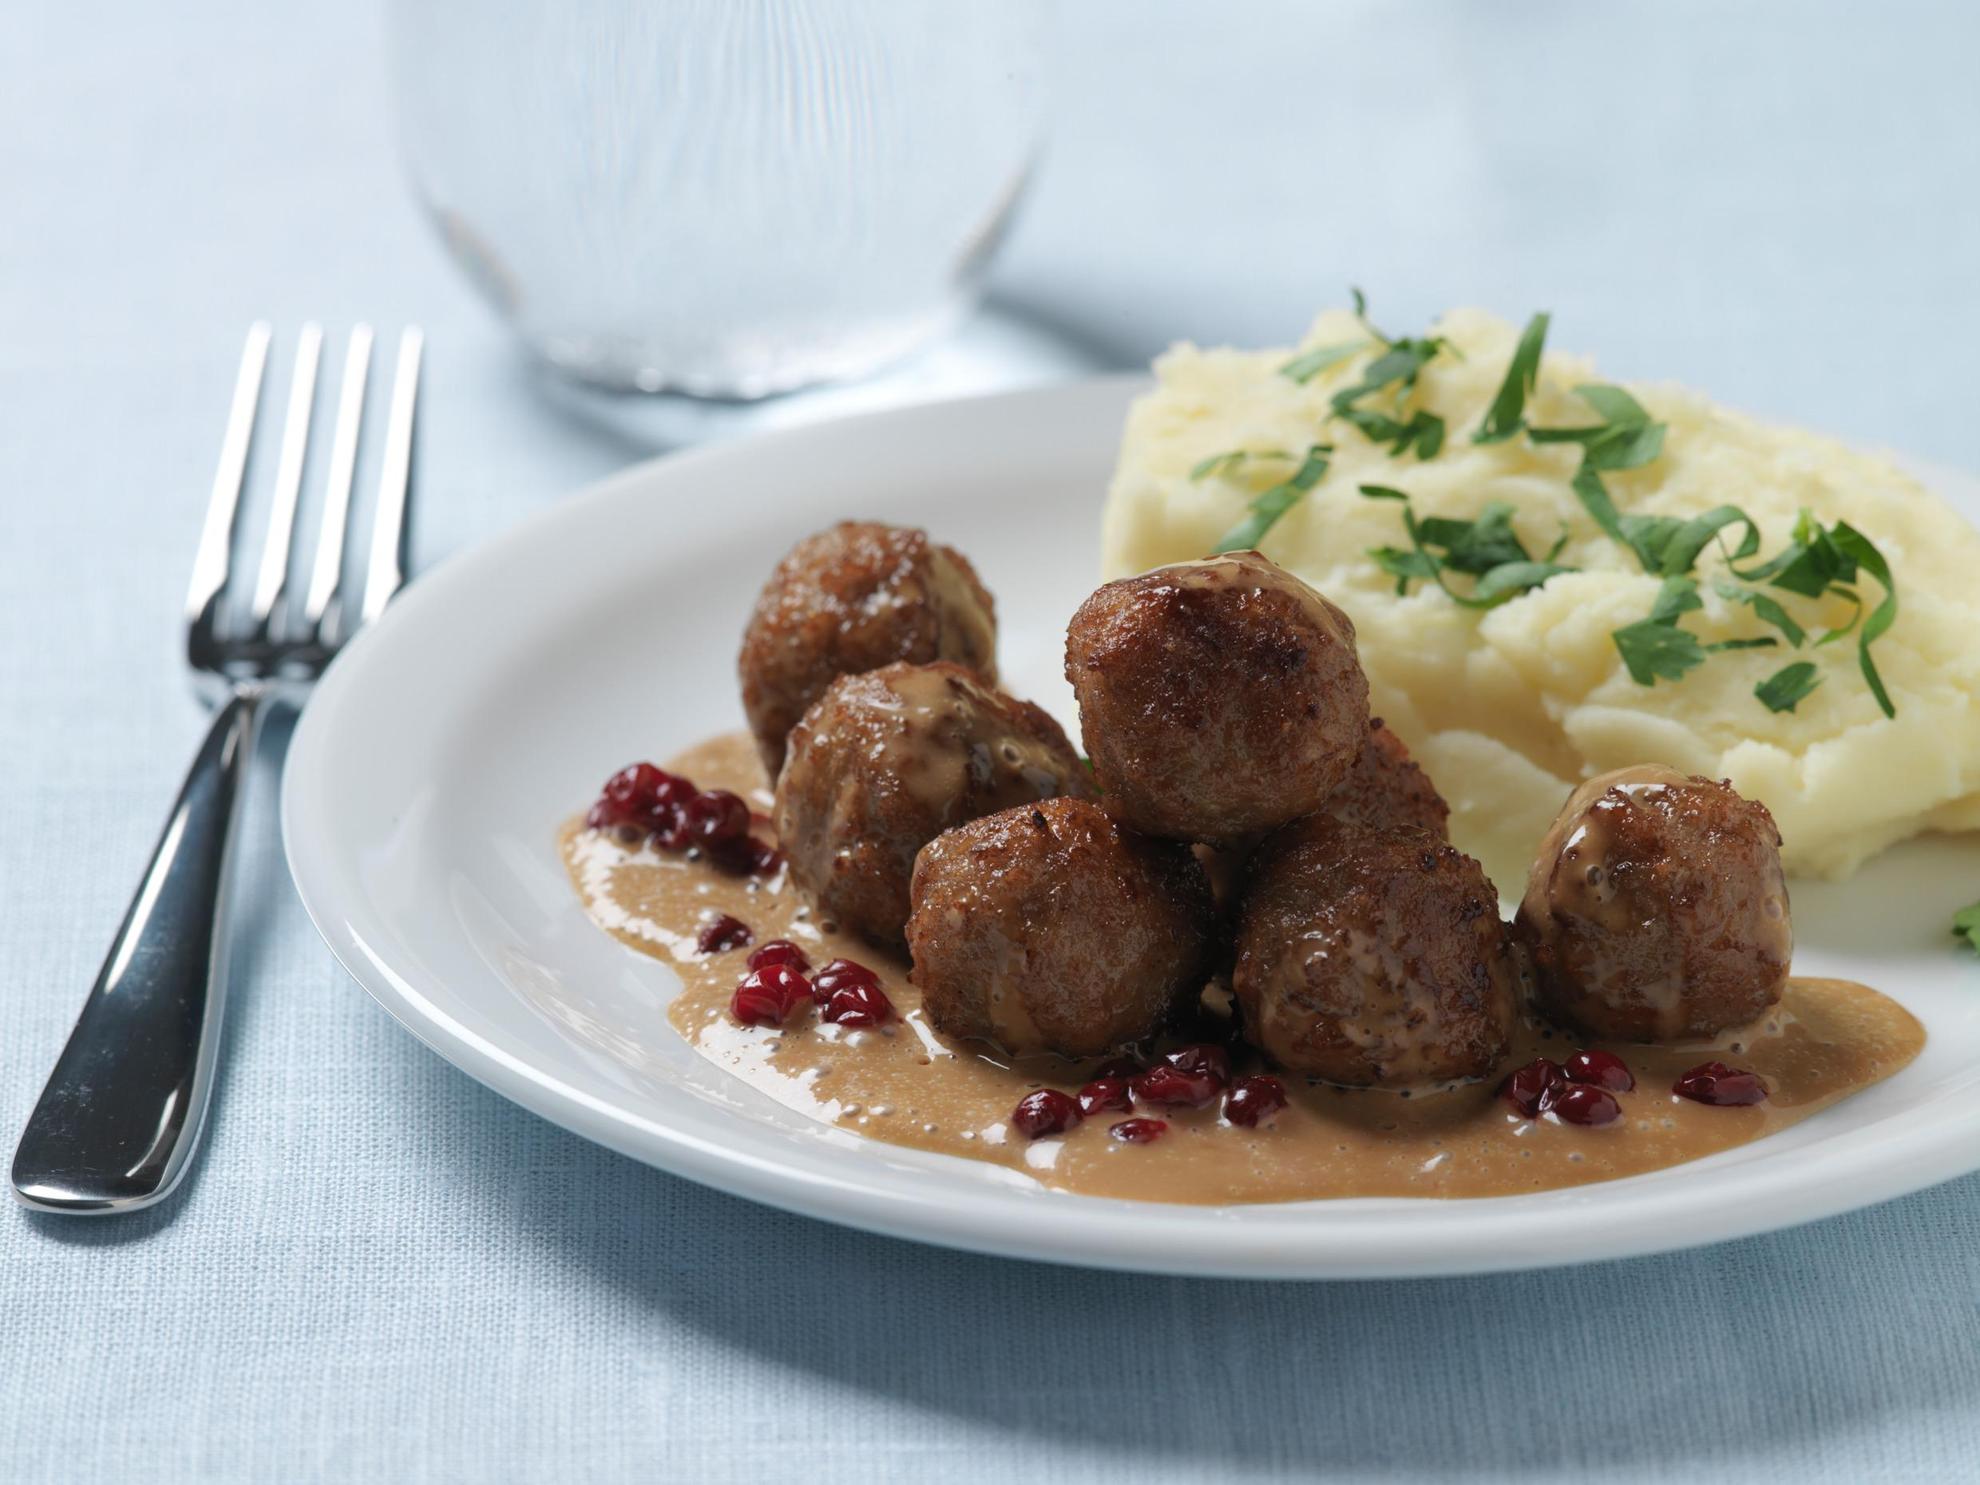 A table is set with a plate of meatballs, mashed potatoes, brown gravy and lingonberry jam next to a glass and fork.